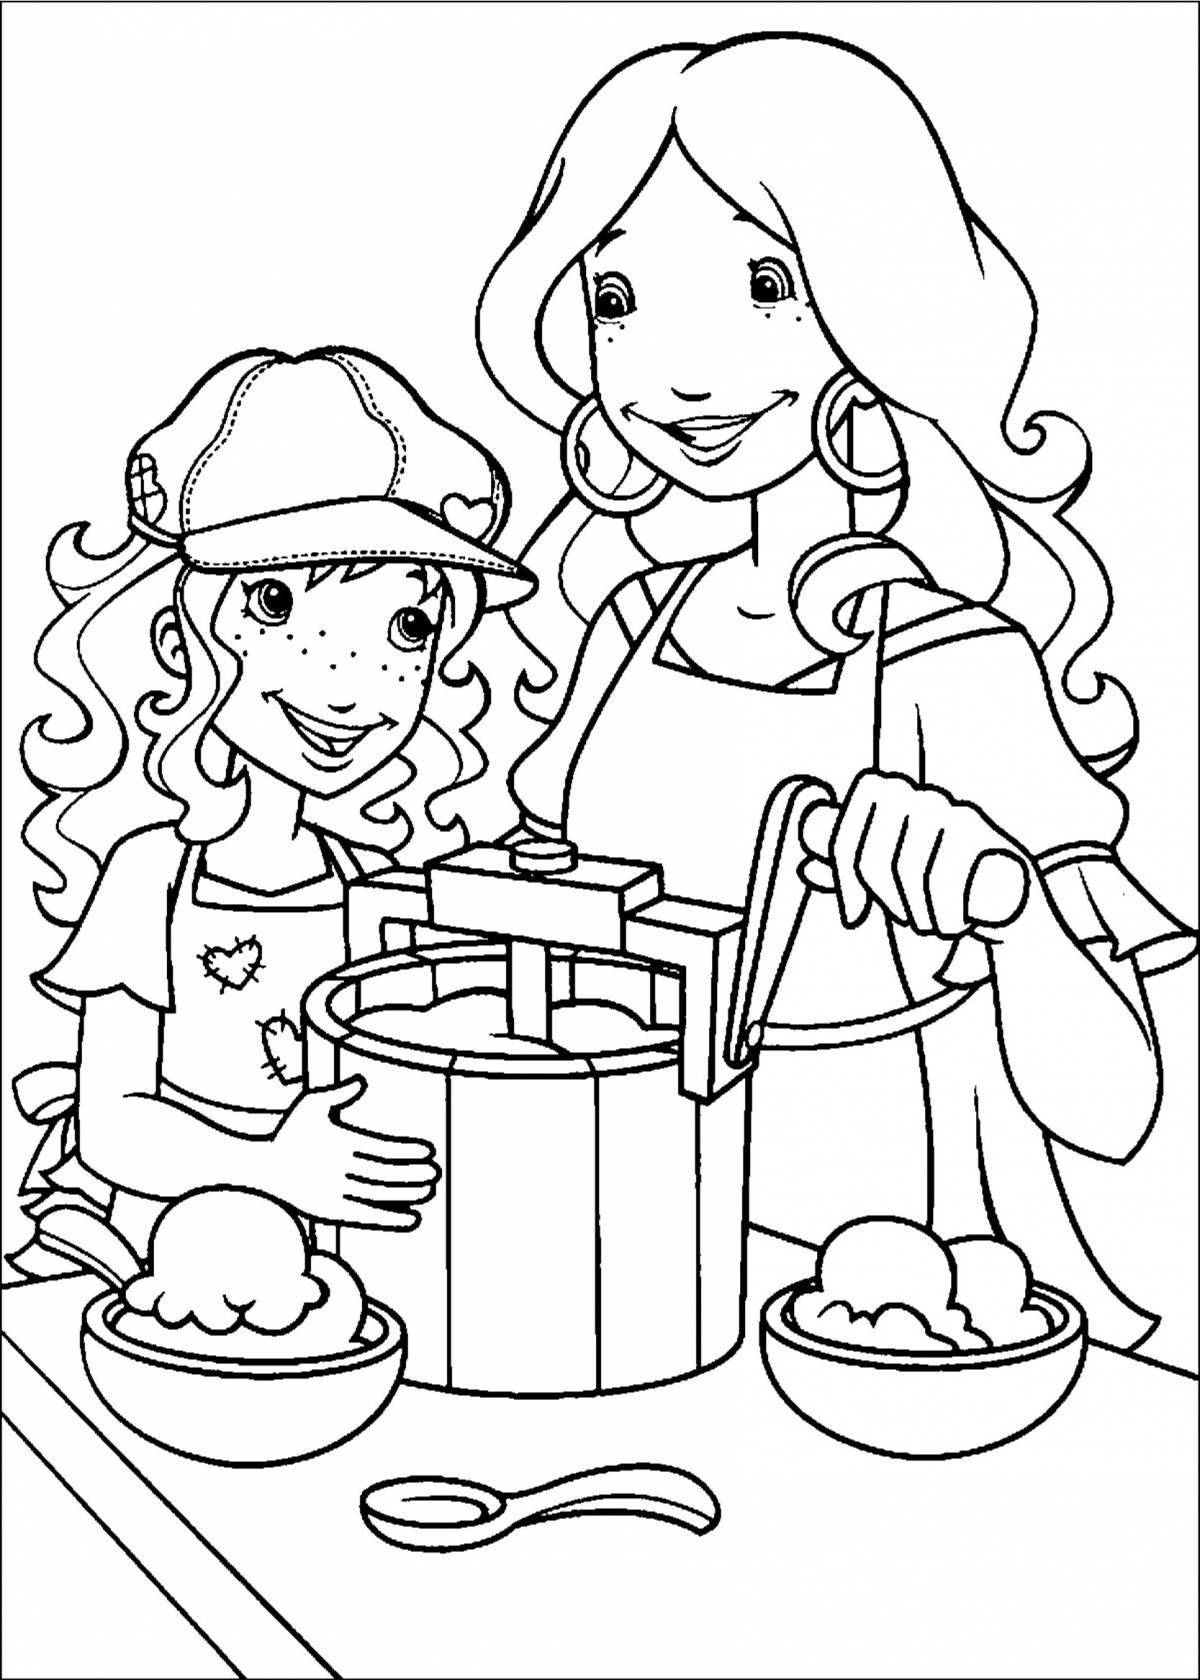 Exciting daughter coloring page